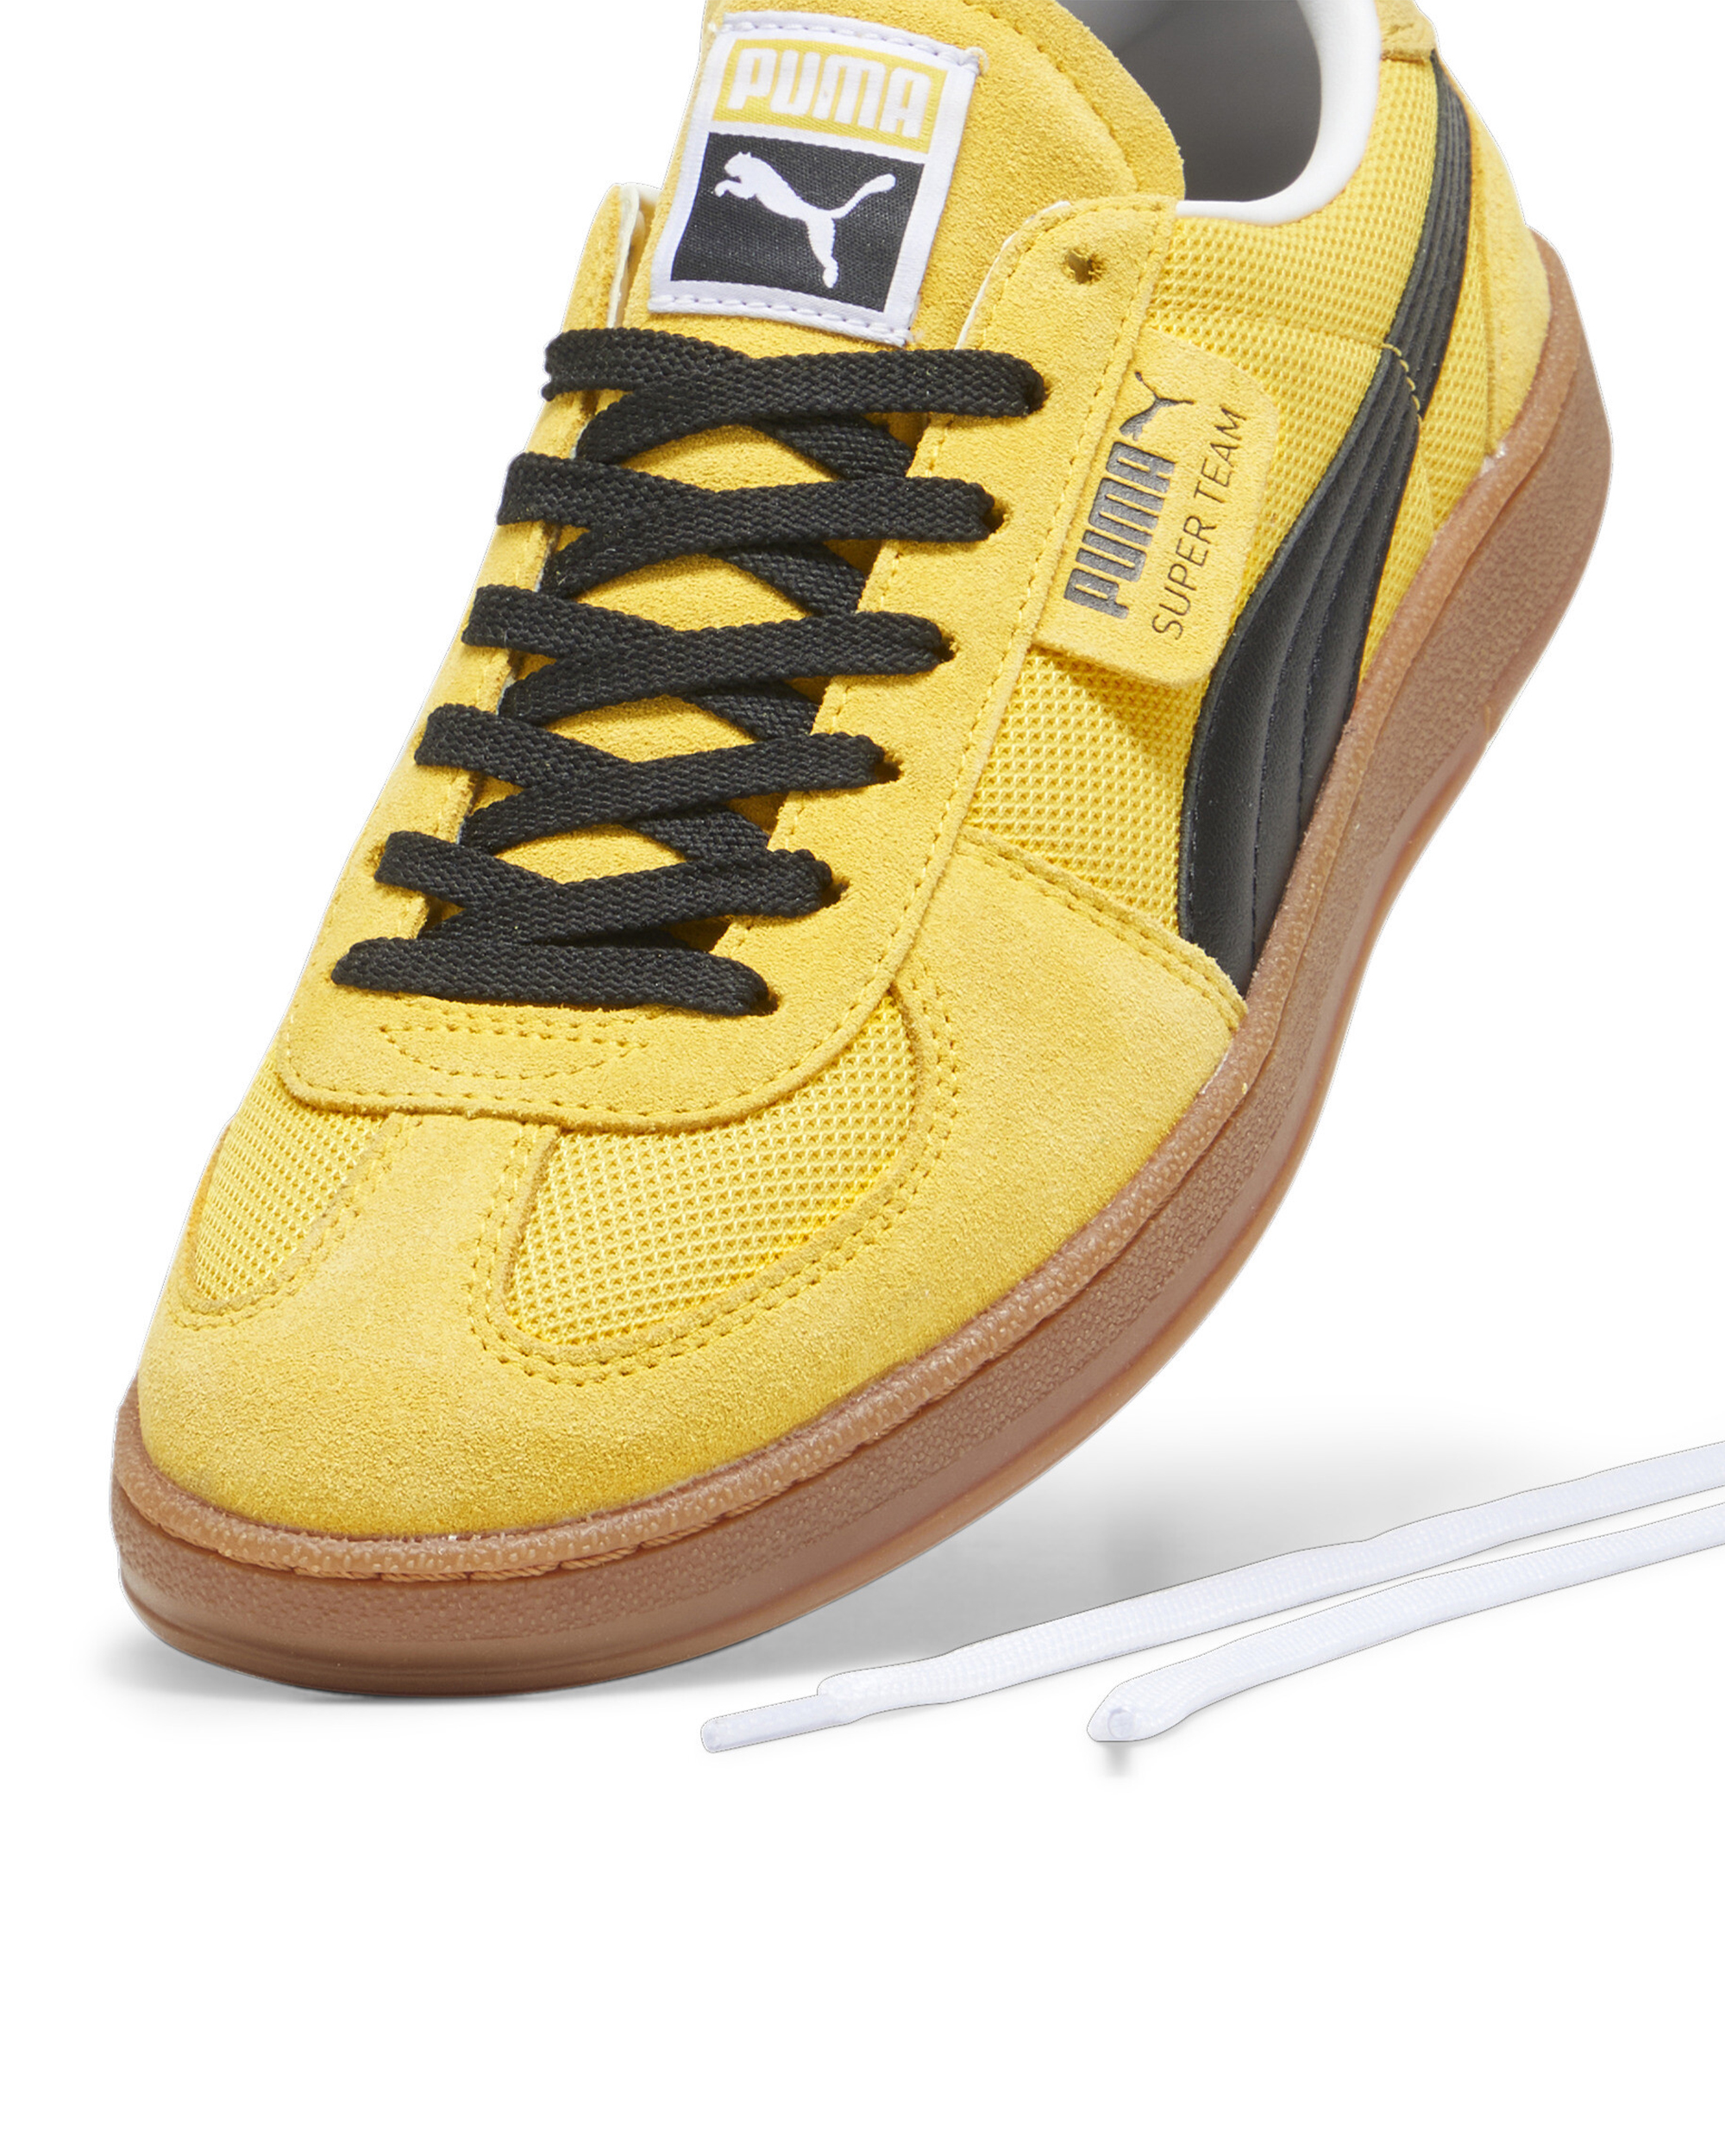 Shop Puma Sneaker Super Team Og Yellow Sizzle / Black In 11yellow Sizzle- Black